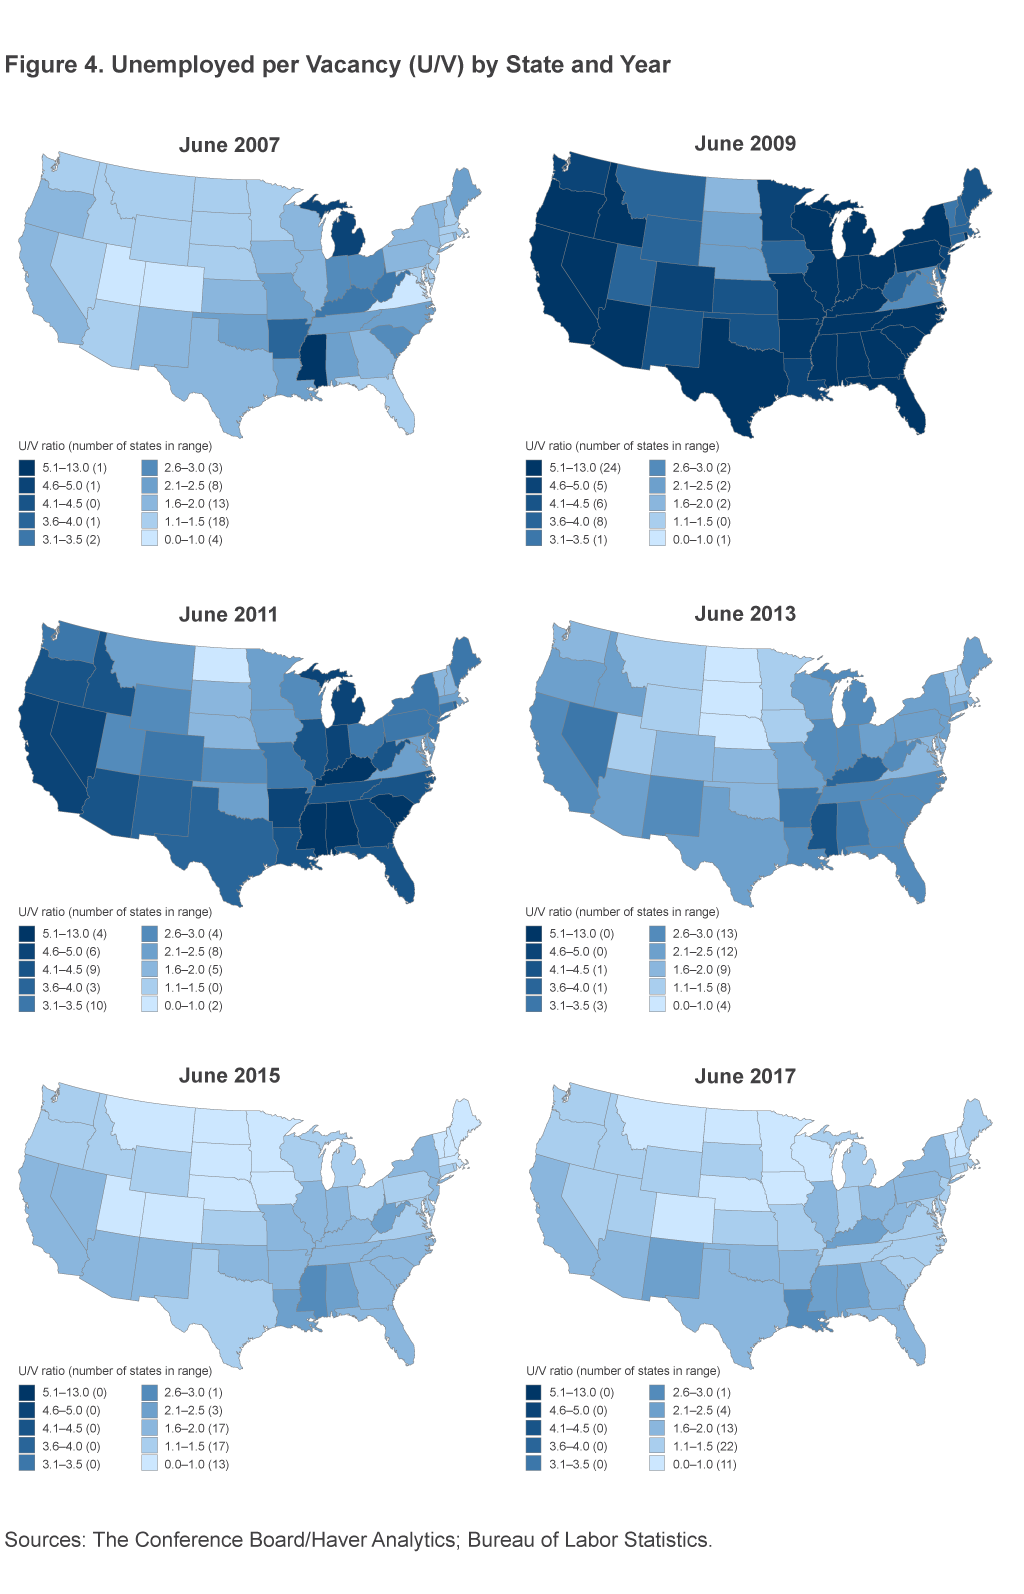 Figure 4. Unemployed per Vacancy (U/V) Ratios by State and Year